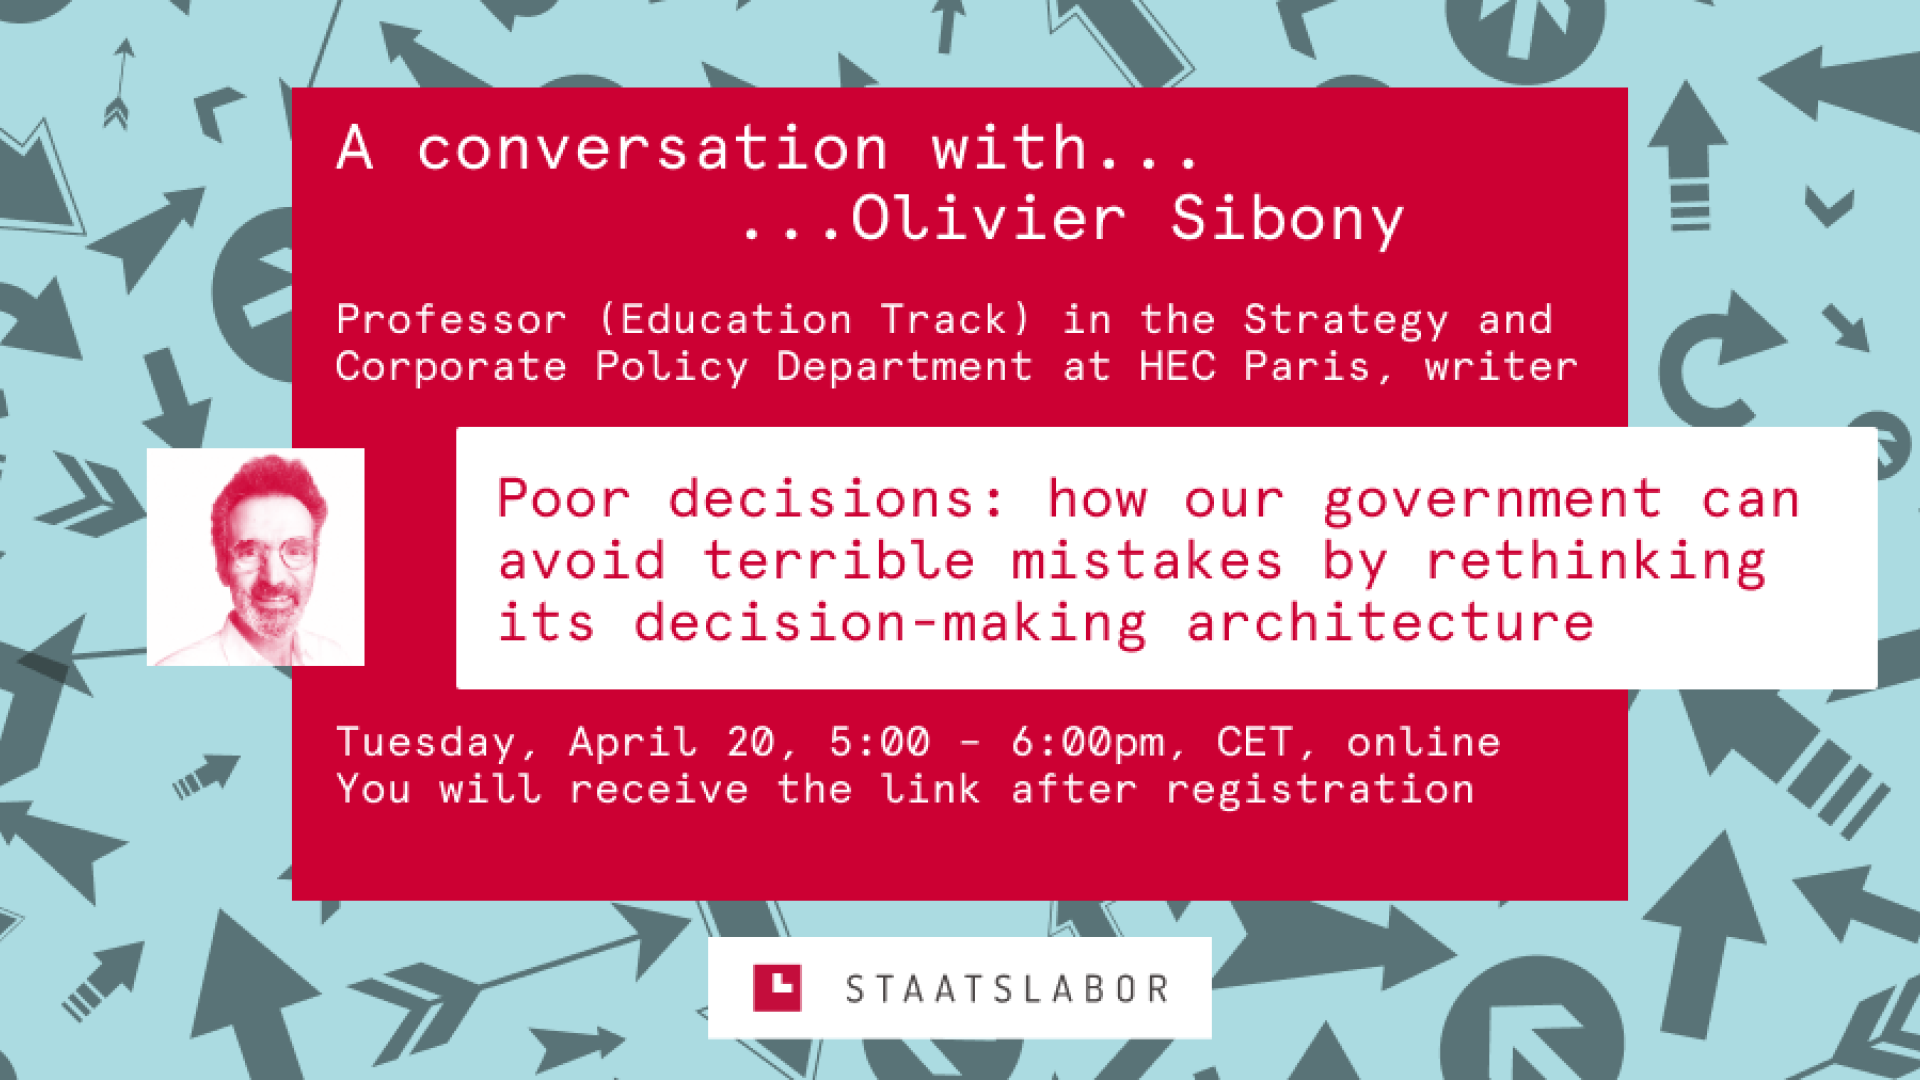 Flyer Conversation with Olivier Sibony